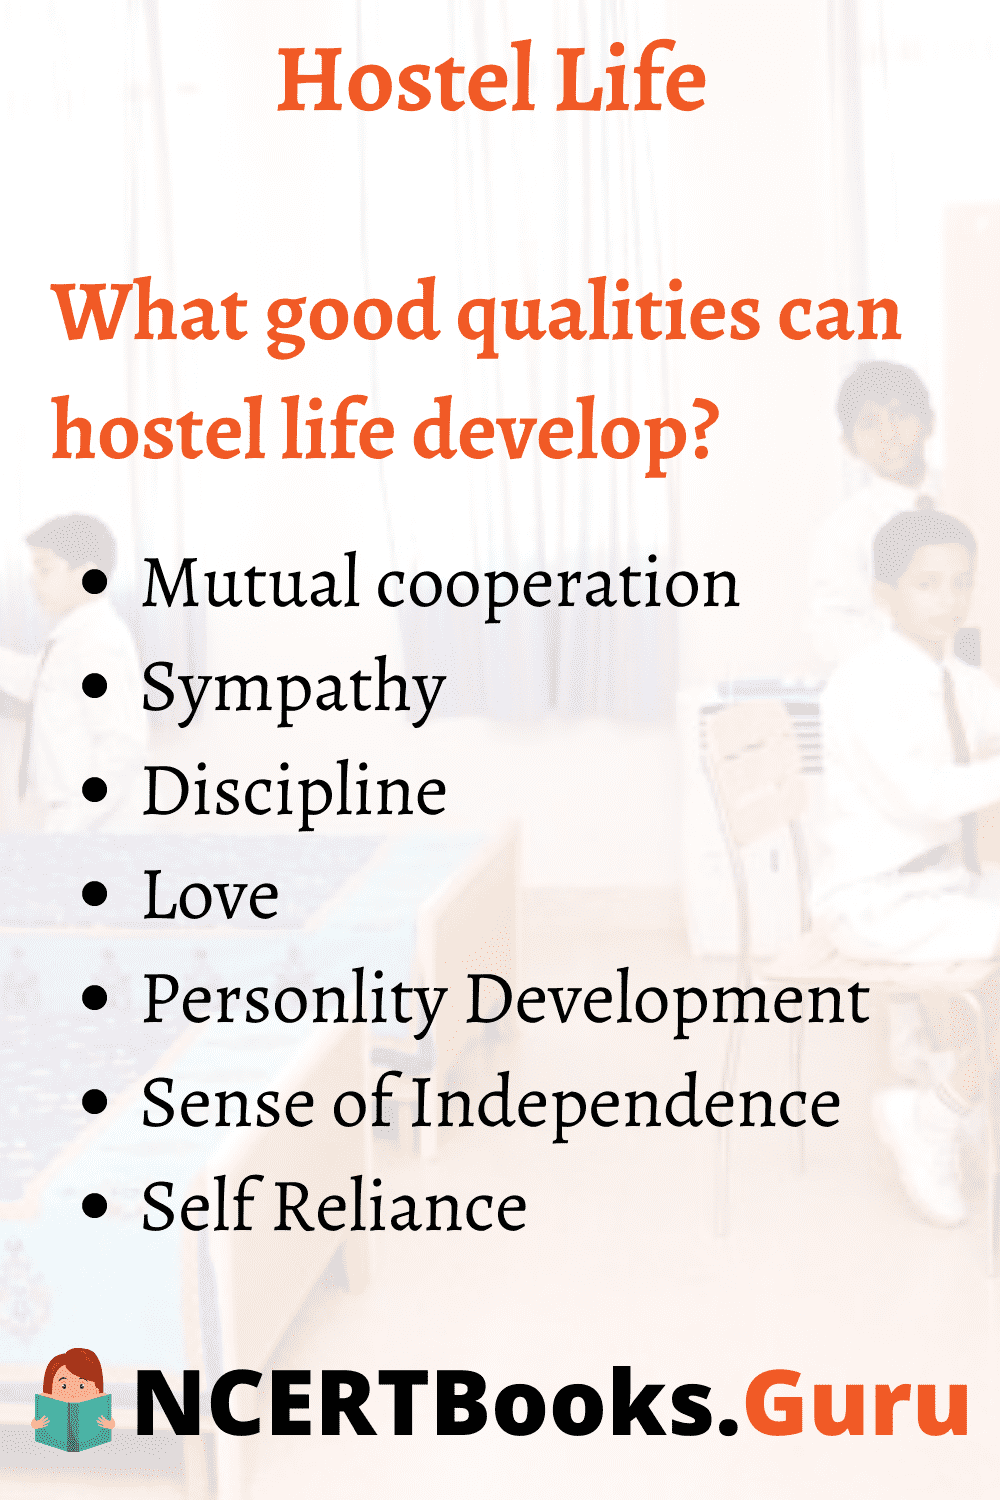 Qualities Hostel Life can Develop